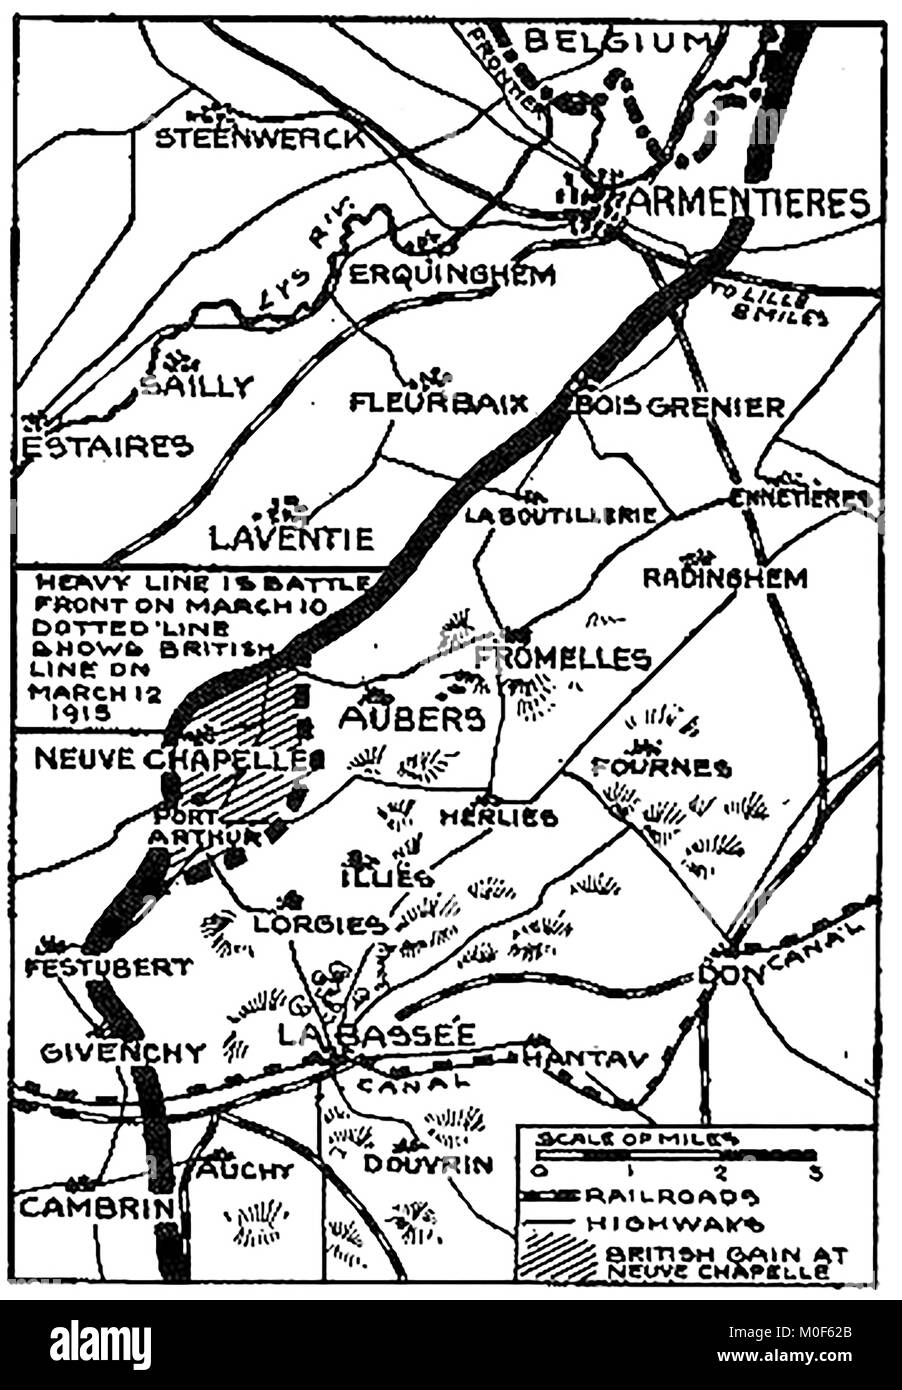 WWI - A 1917 map showing military activity in the 1914-1918 First World War - WWI map Battle at Neuve Chapelle 1915 and British lines in March 1915 Stock Photo